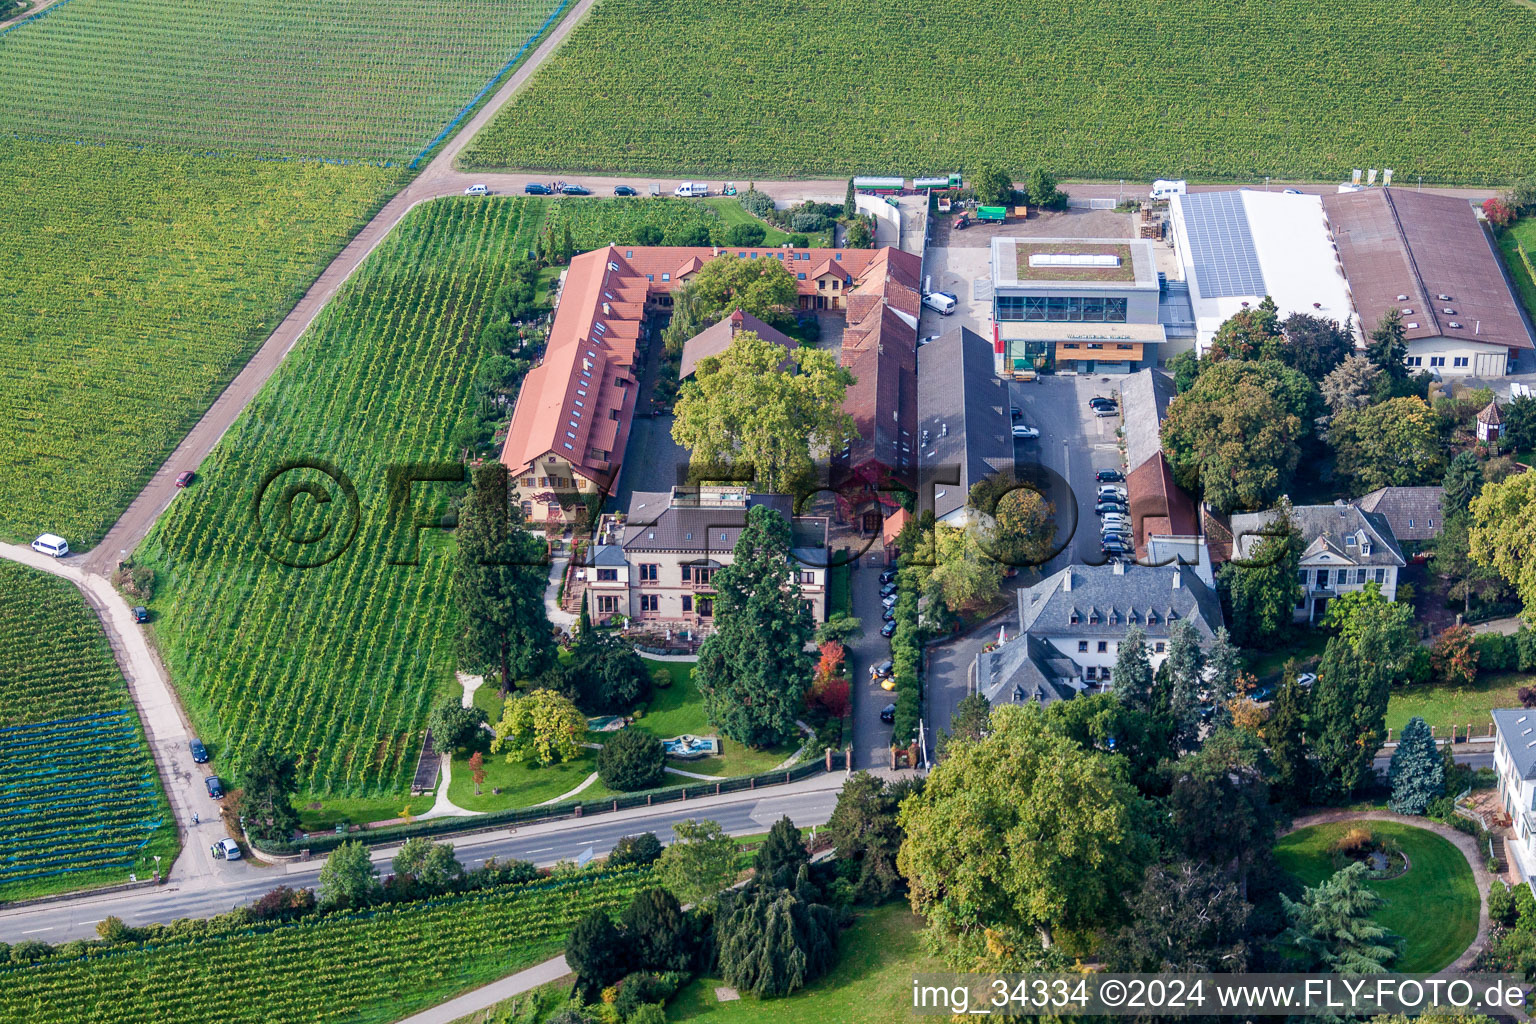 Oblique view of Buildings and parks at the mansion of the wine cellar Weingut Dr. Buerklin-Wolf in Wachenheim an der Weinstrasse in the state Rhineland-Palatinate, Germany